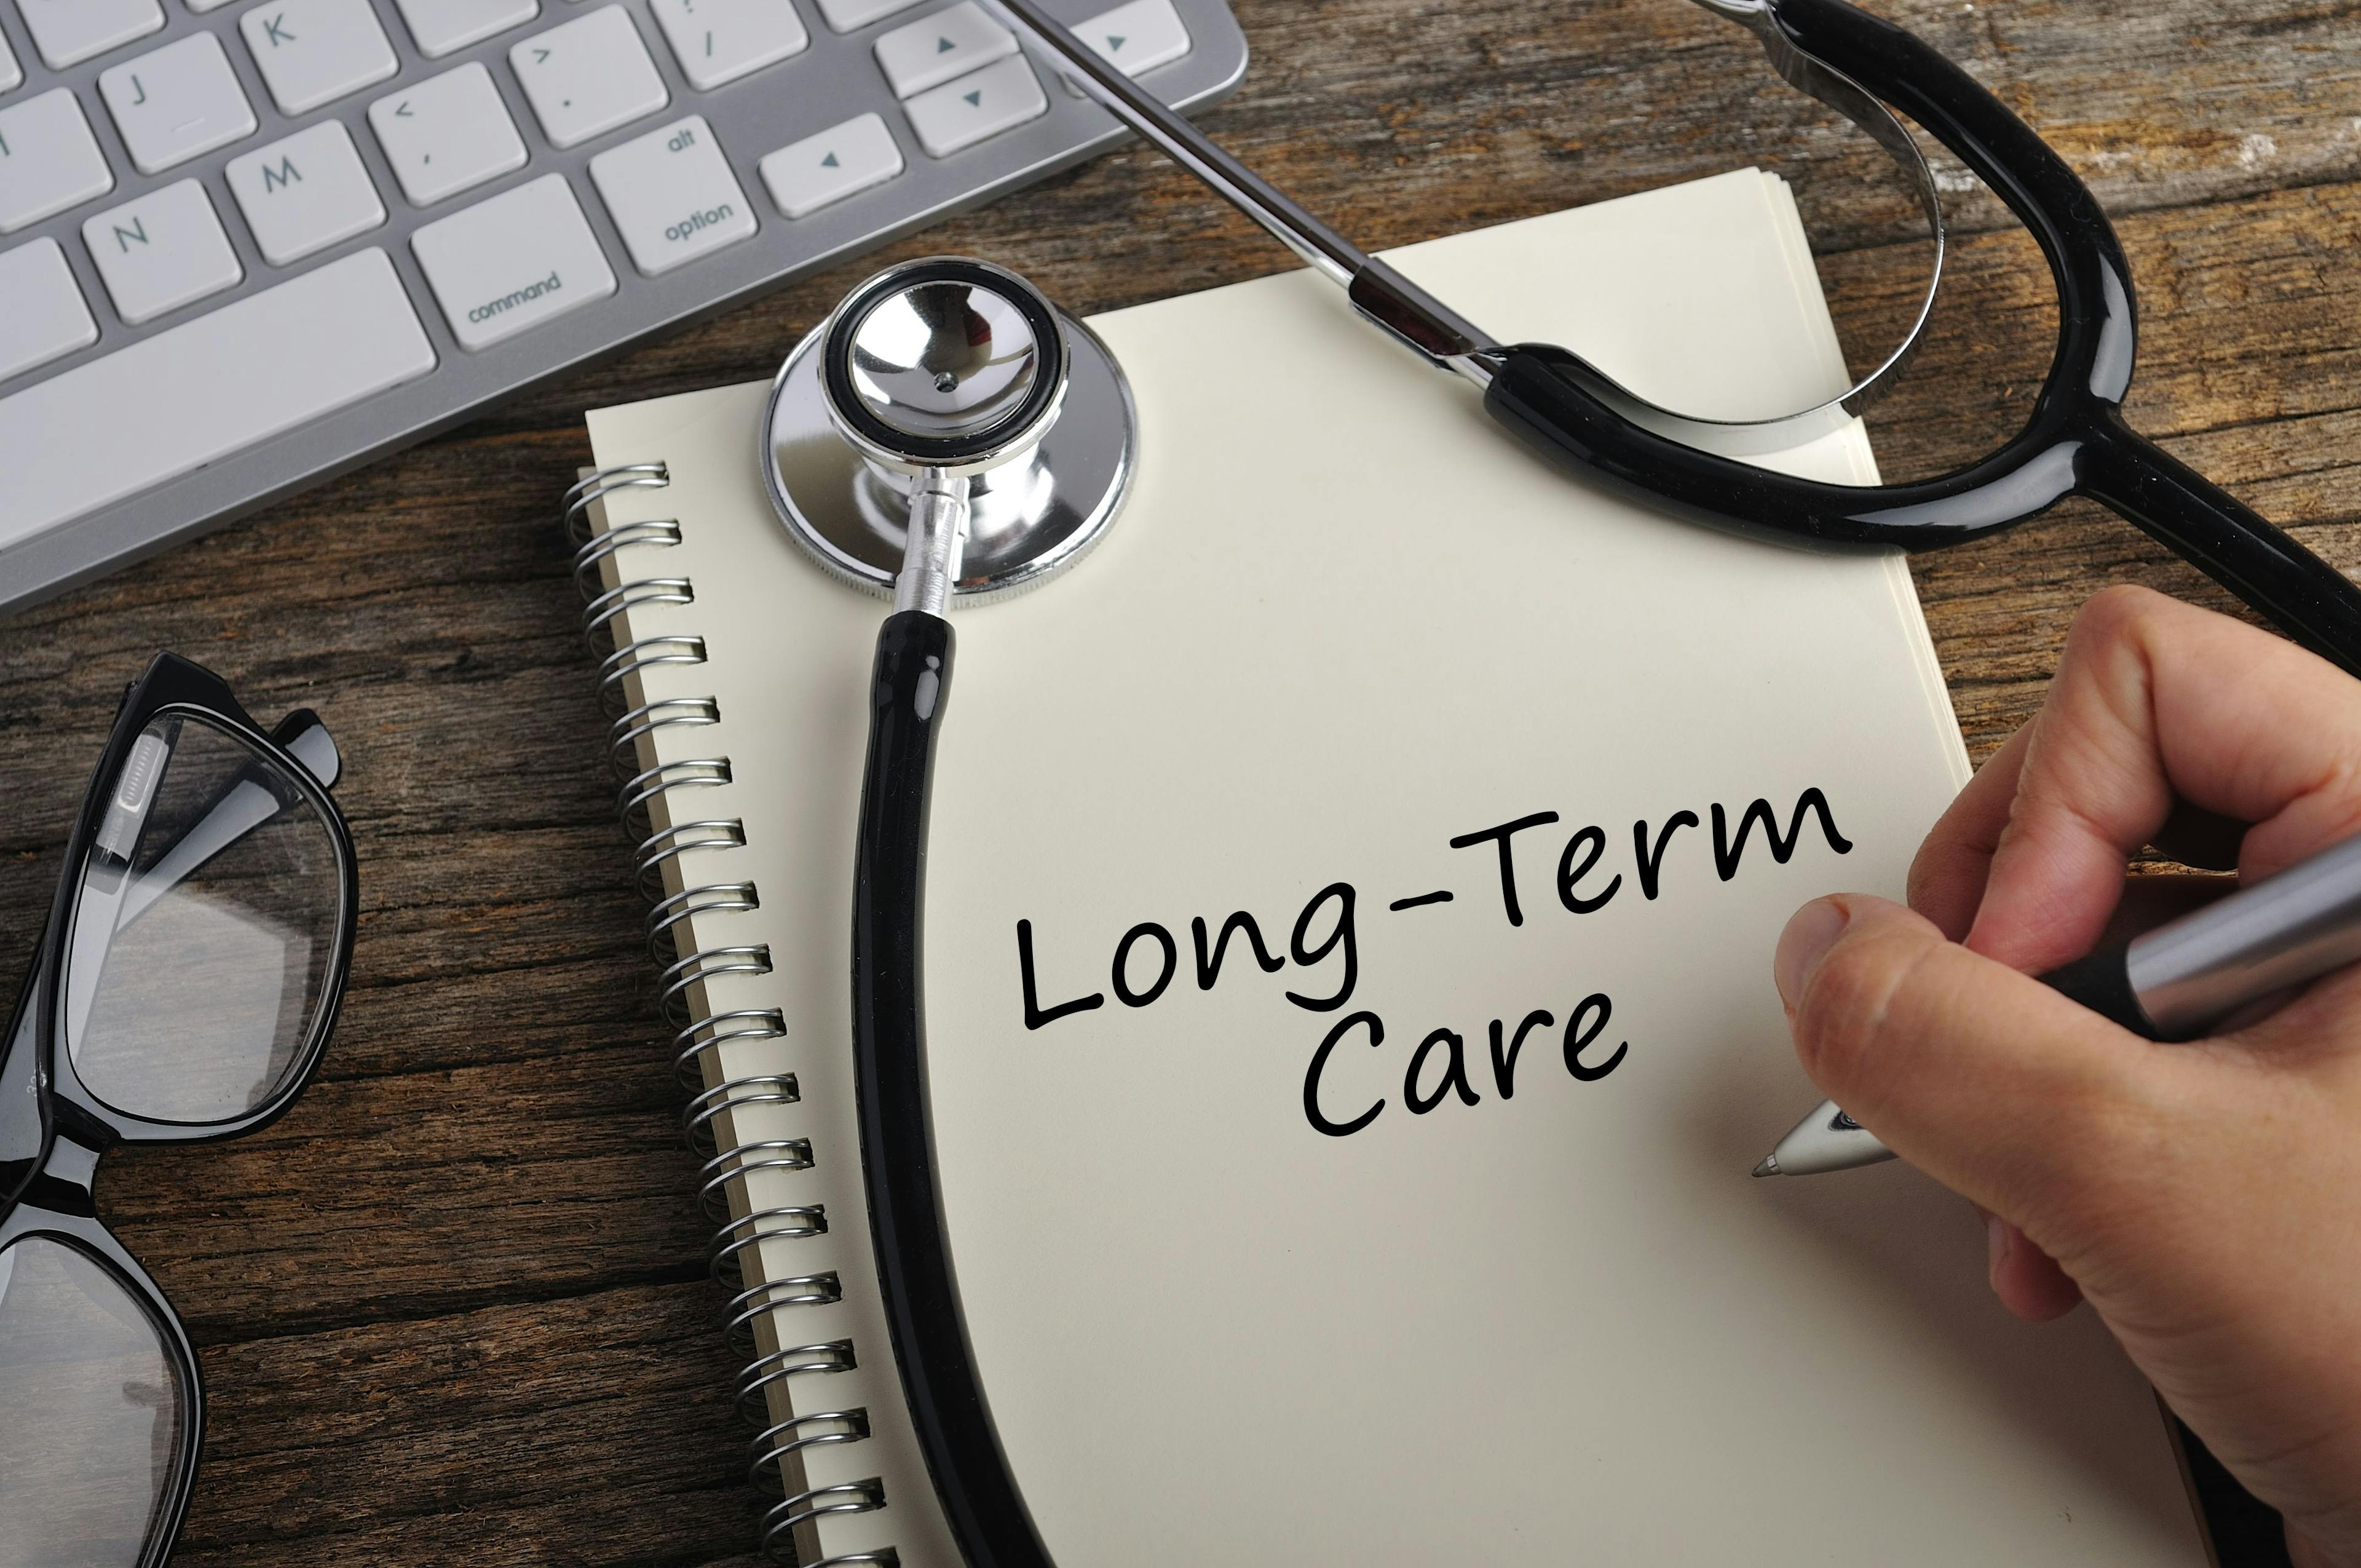 Women Hand Writes "long-term care" On Note Book